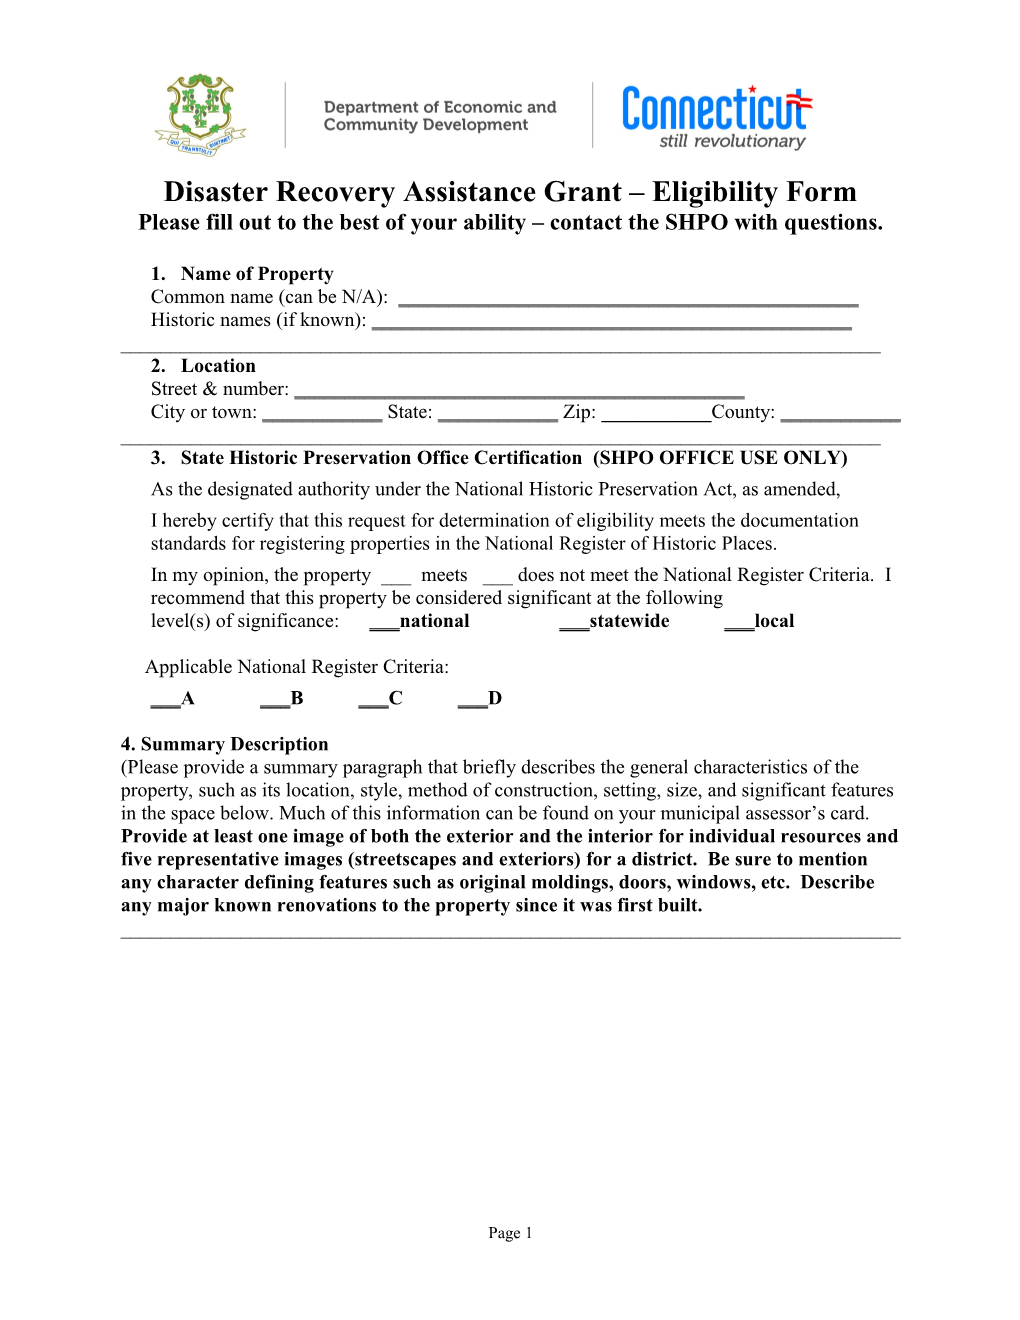 Disaster Recovery Assistance Grant Eligibility Form